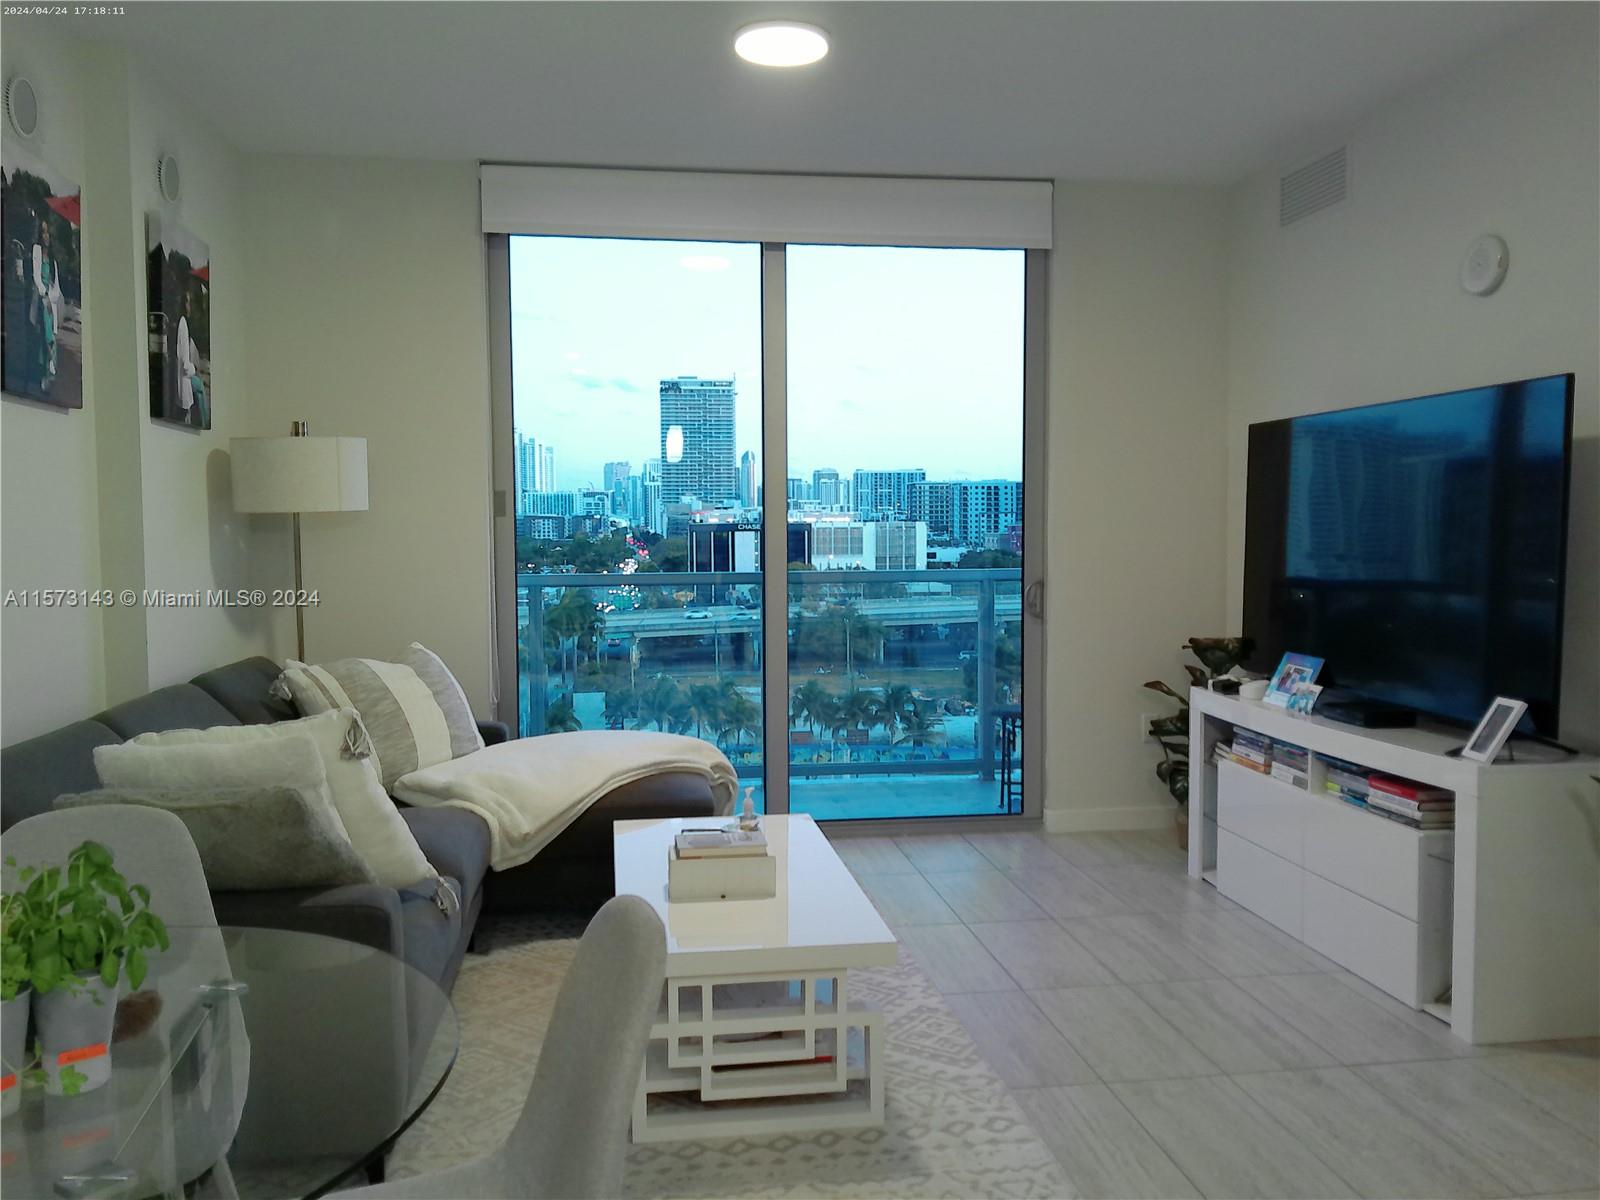 Amazing 1-bedroom turnkey condo in the most unique buildings of Miami design district. The amenities include a resort-style pool area with scenic views of the bay, gym, bbq area, party or business lounge and electric car chargers. Walking distance from building to where you can enjoy all the restaurants and shopping area.